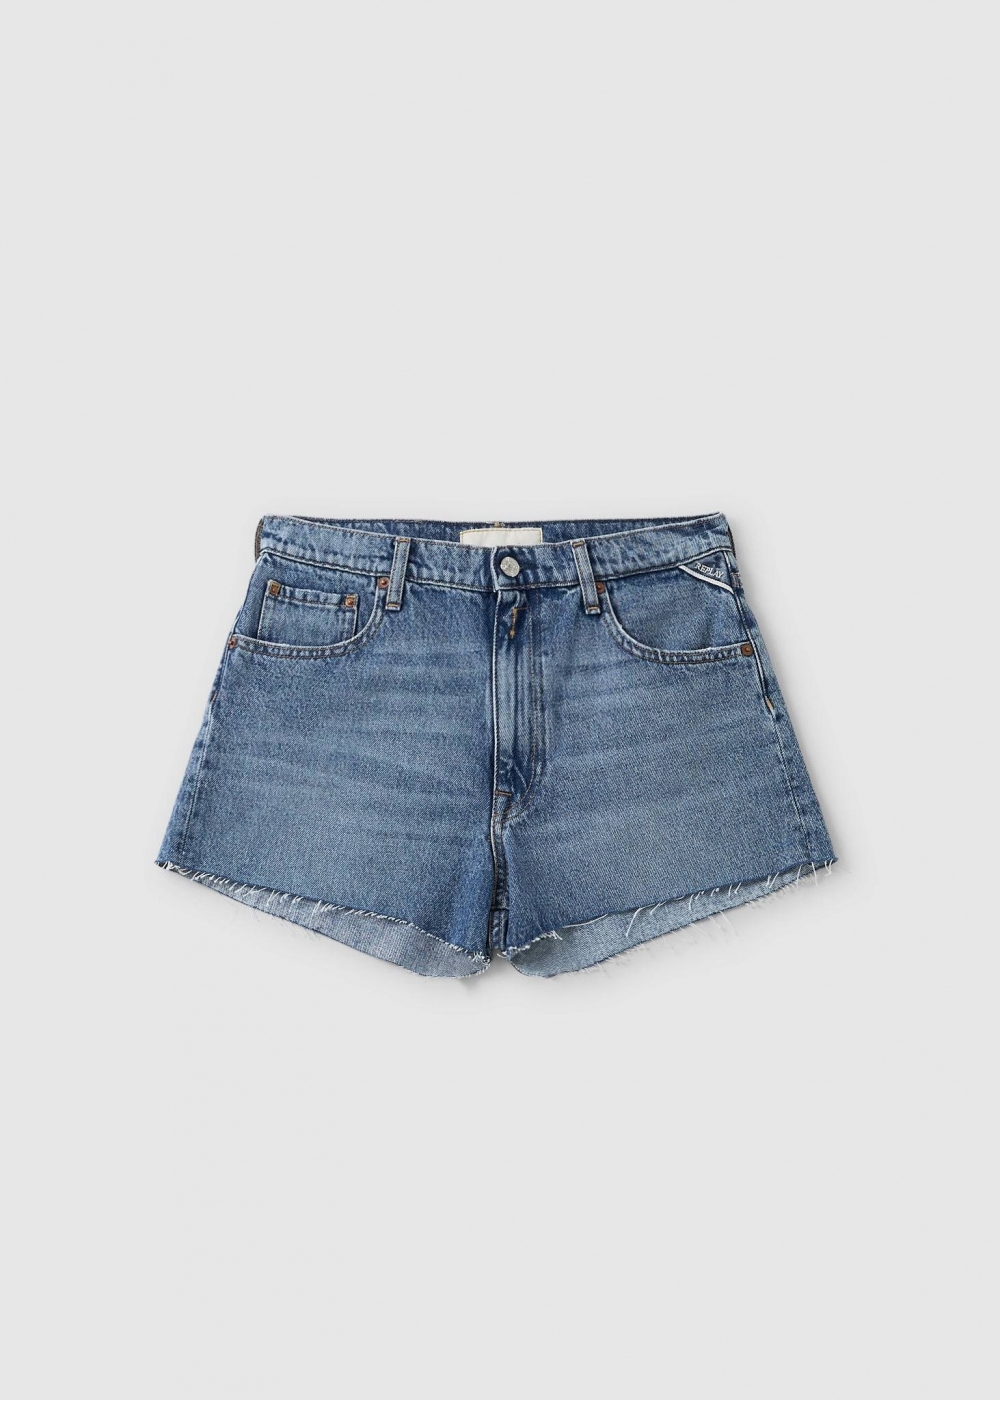 Replay Womens Rose Label Shorts In Light Blue